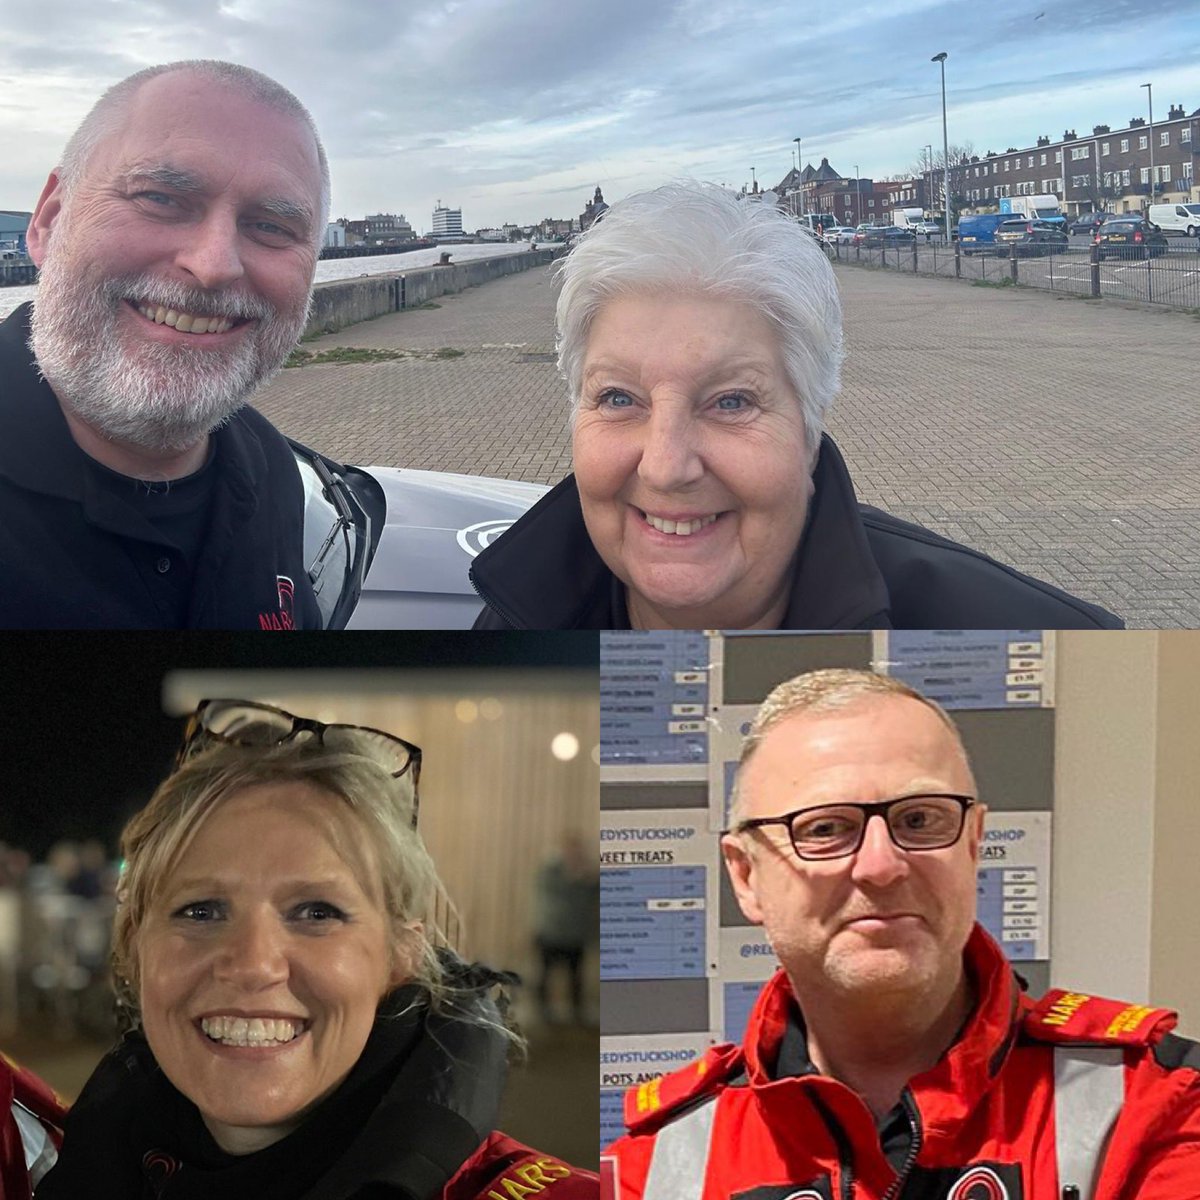 Some of our NARS volunteers giving their Saturday up to attend patients from West Norfolk to the East Coast / Waveney area it’s been a busy day for Critical Care Paramedic Carl, Nurse Sue and First Responders Steve & Pat. #TeamNARS